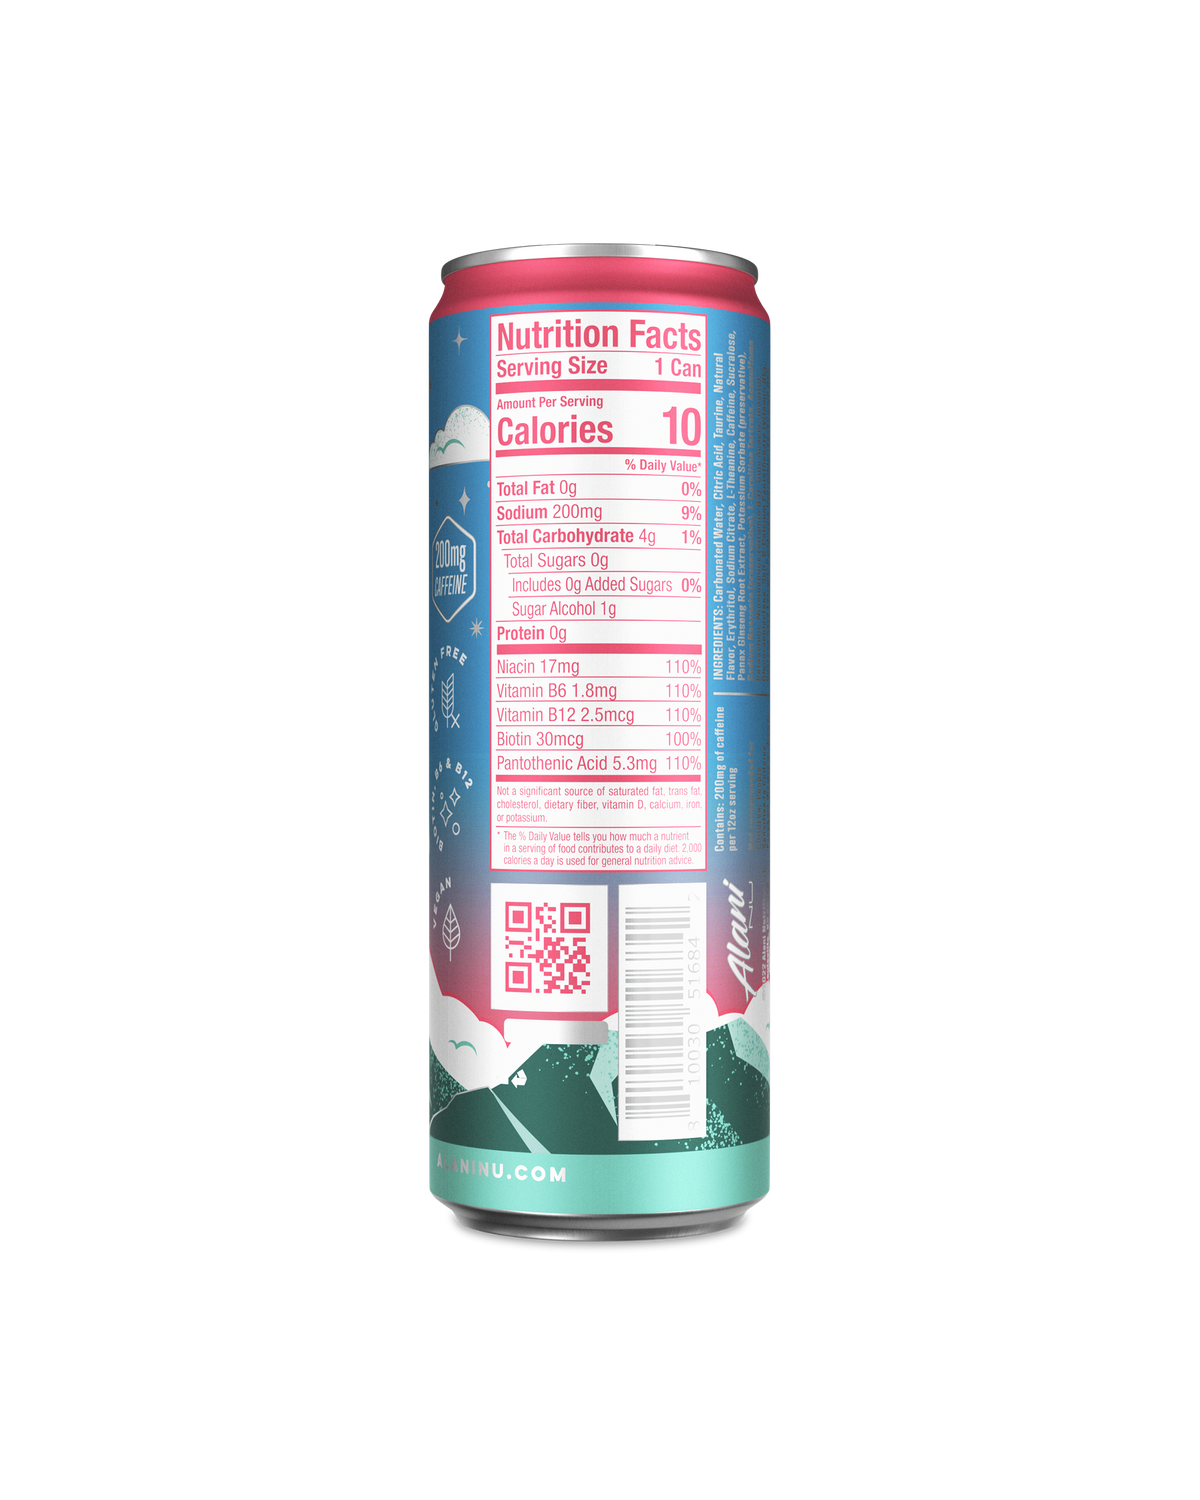 A back view of Energy Drink in Kiwi Guava flavor highlighting nutrition facts.